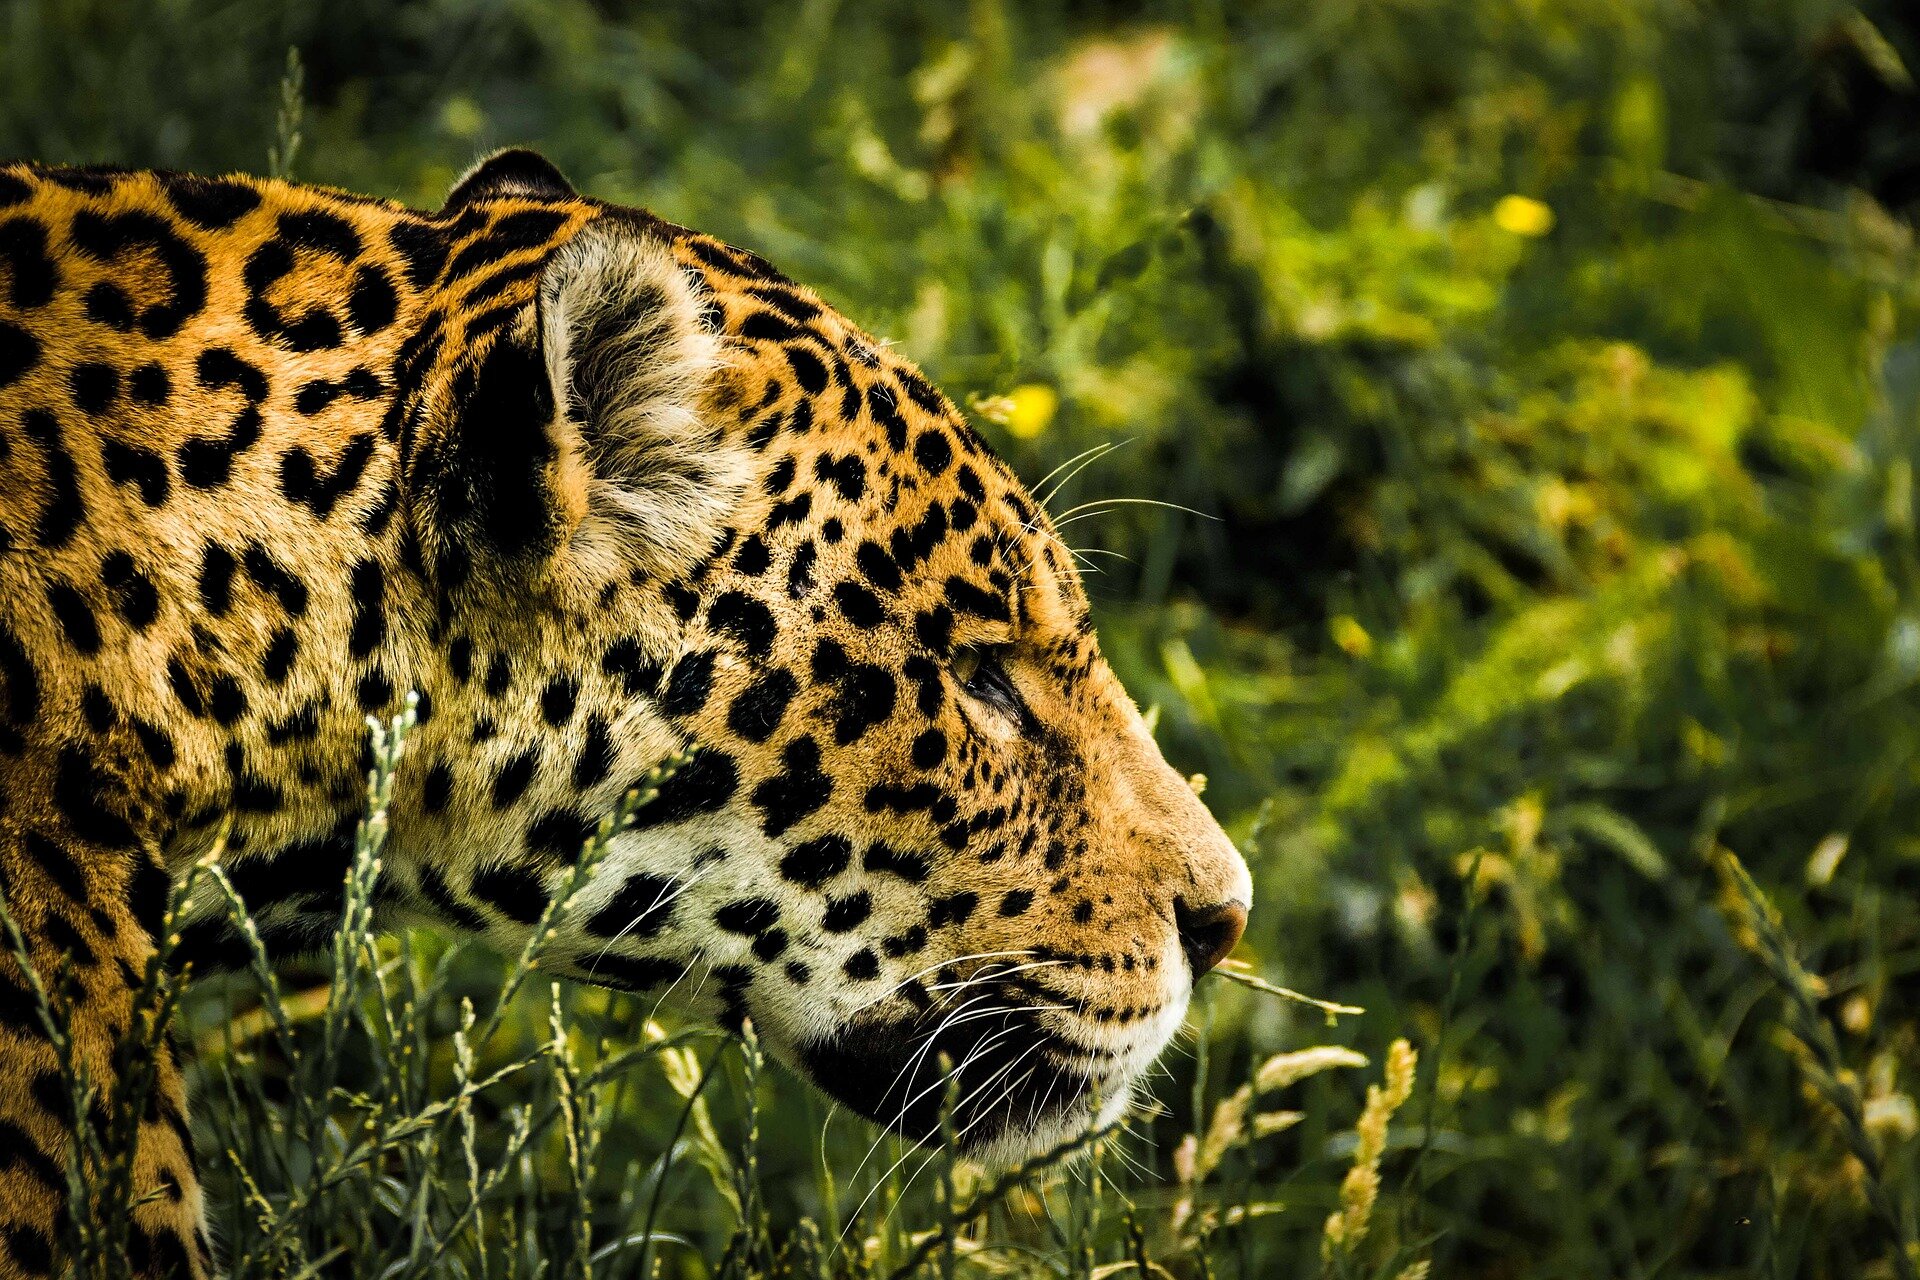 Now is the time to think about reintroducing jaguars into the US